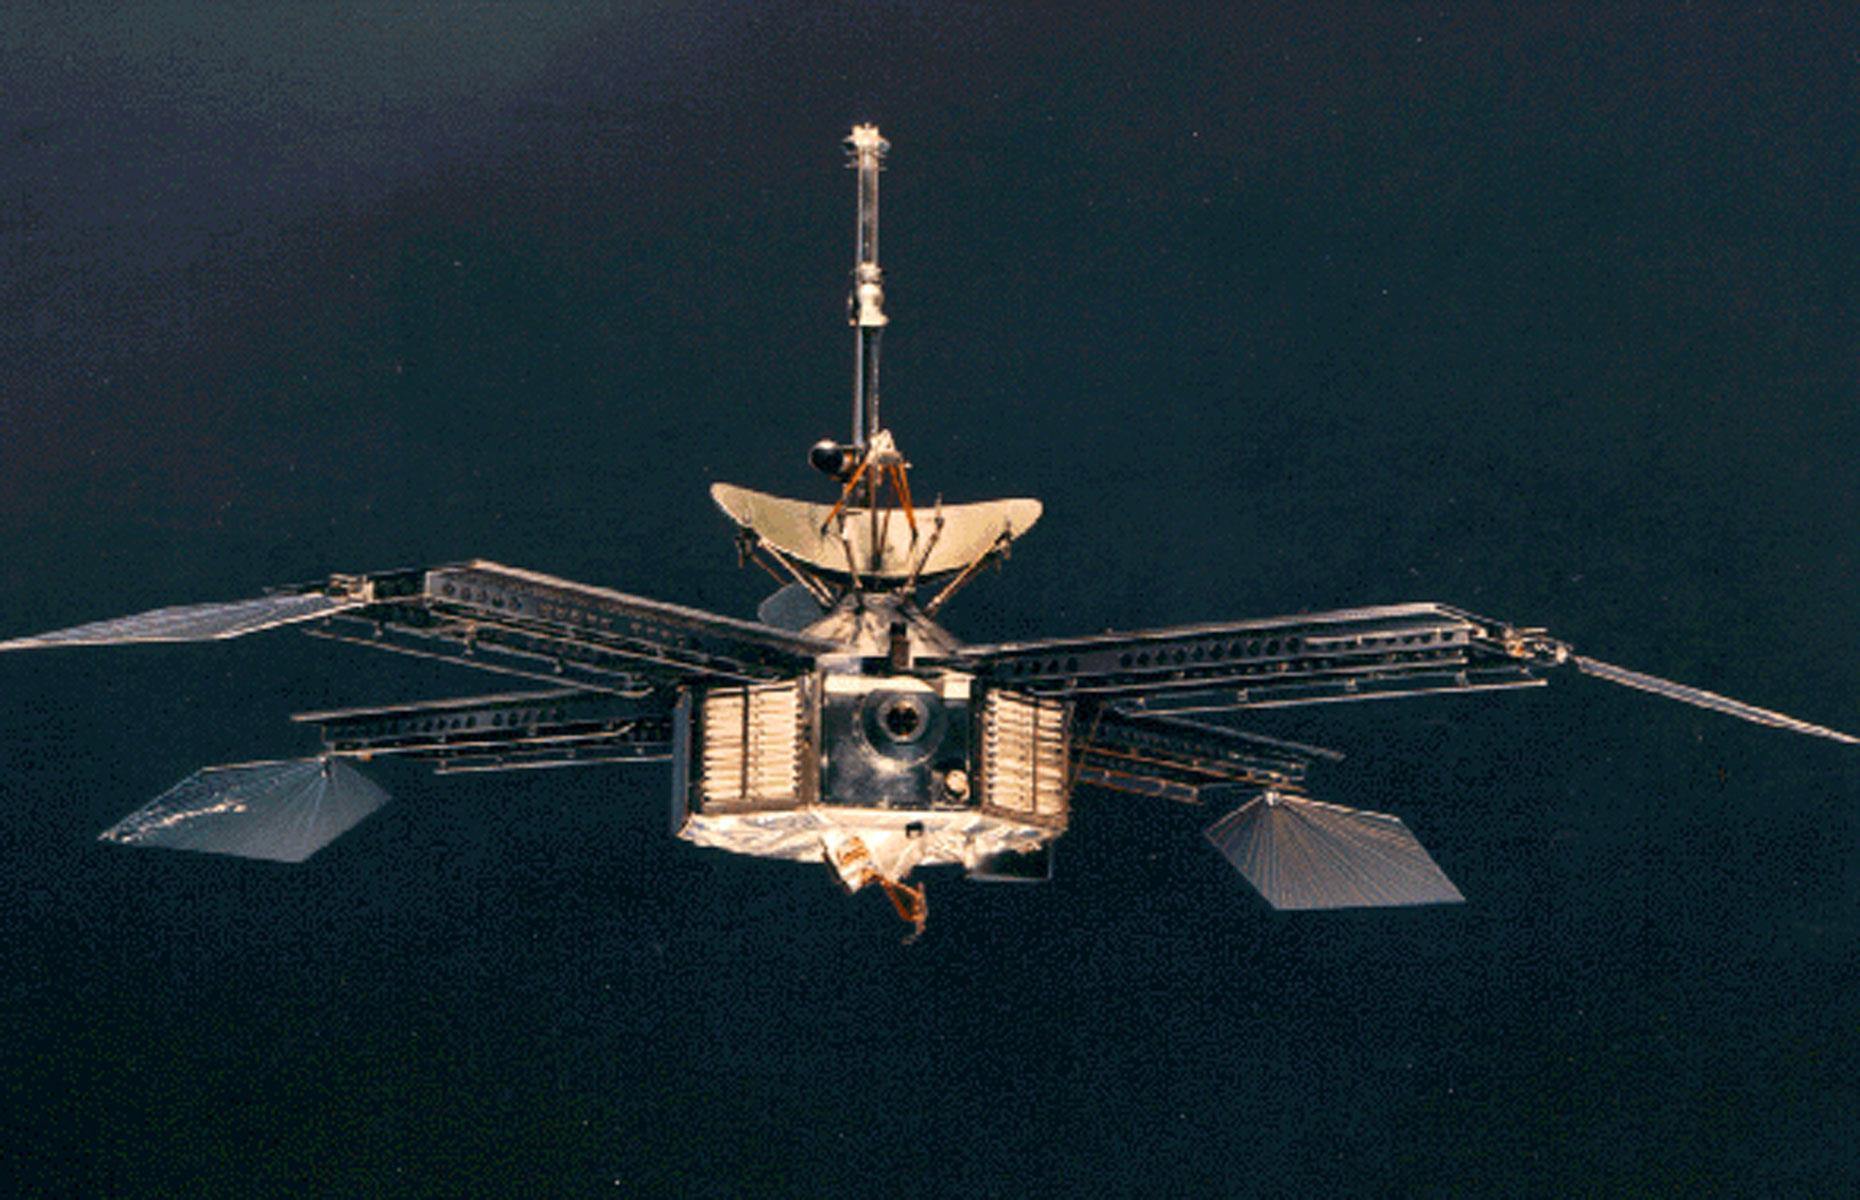 Dismaying the Soviets, America's Mariner 4 performed the first flyby of Mars in July 1965 and beamed back the first detailed images of the Red Planet's surface. The craft is in perpetual heliocentric orbit somewhere between Mars and Jupiter.